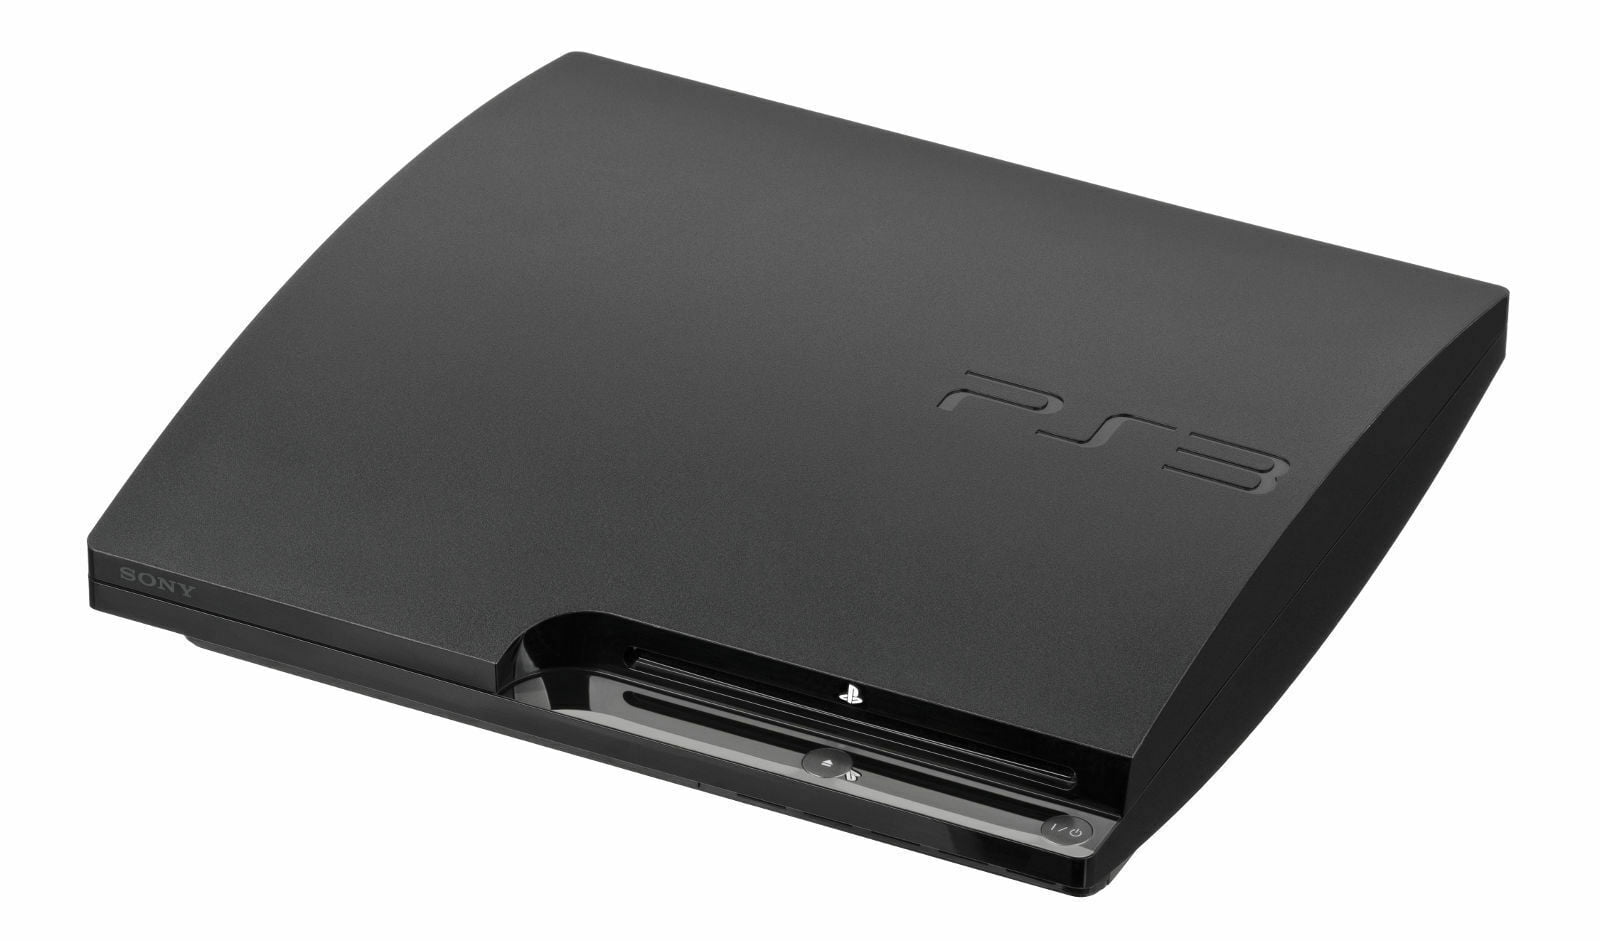  Sony Playstation 3 160GB System : Video Games